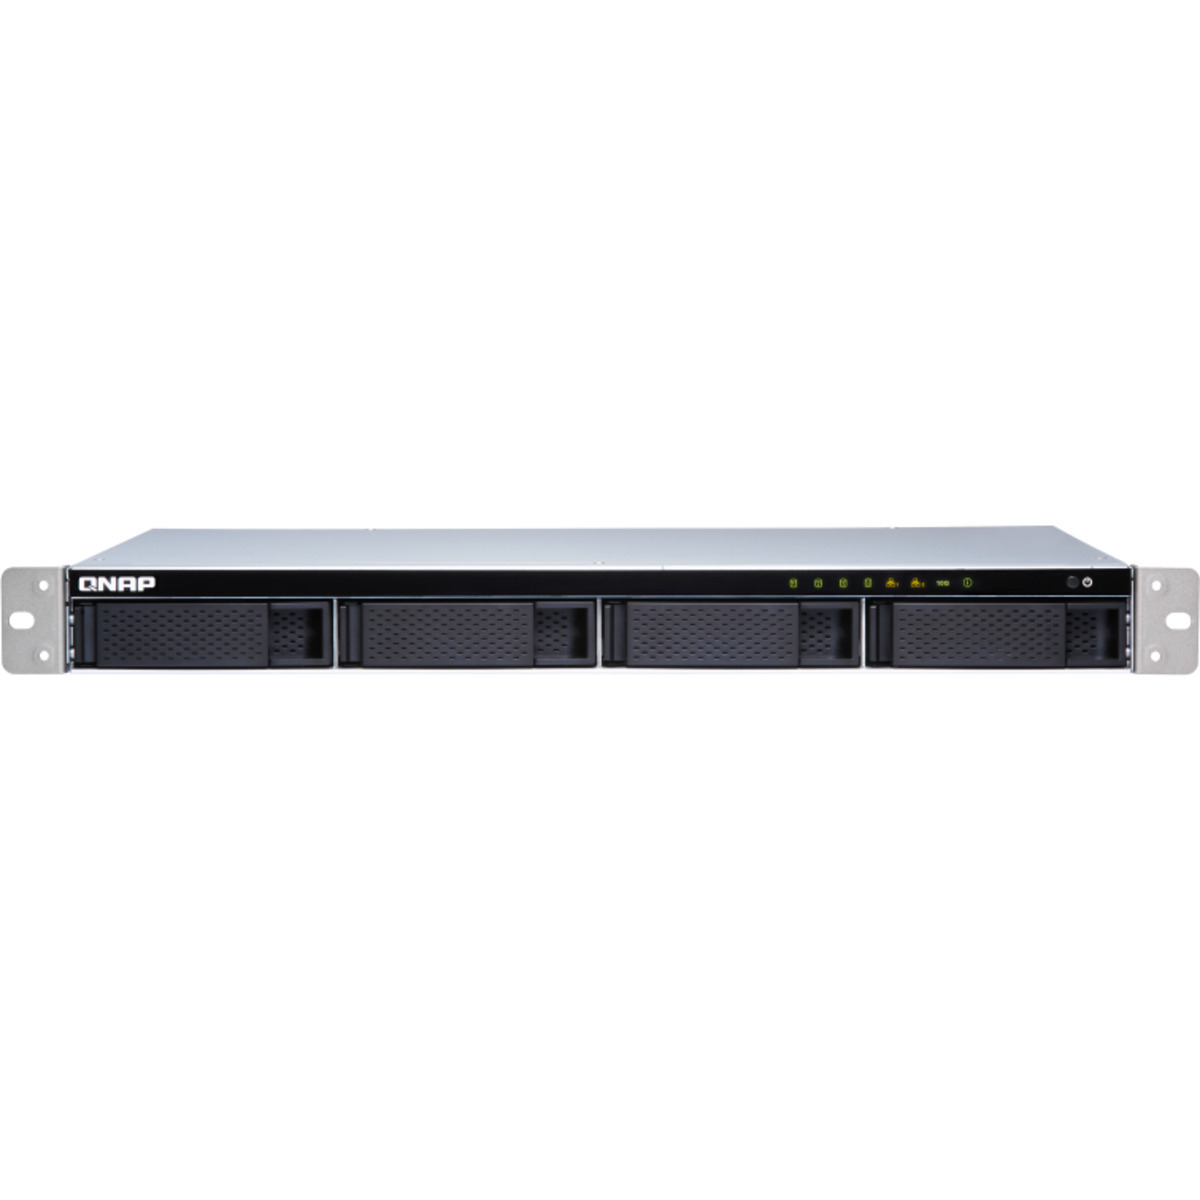 QNAP TS-431XeU 32tb 4-Bay RackMount Multimedia / Power User / Business NAS - Network Attached Storage Device 4x8tb Seagate IronWolf Pro ST8000NT001 3.5 7200rpm SATA 6Gb/s HDD NAS Class Drives Installed - Burn-In Tested - ON SALE - FREE RAM UPGRADE TS-431XeU